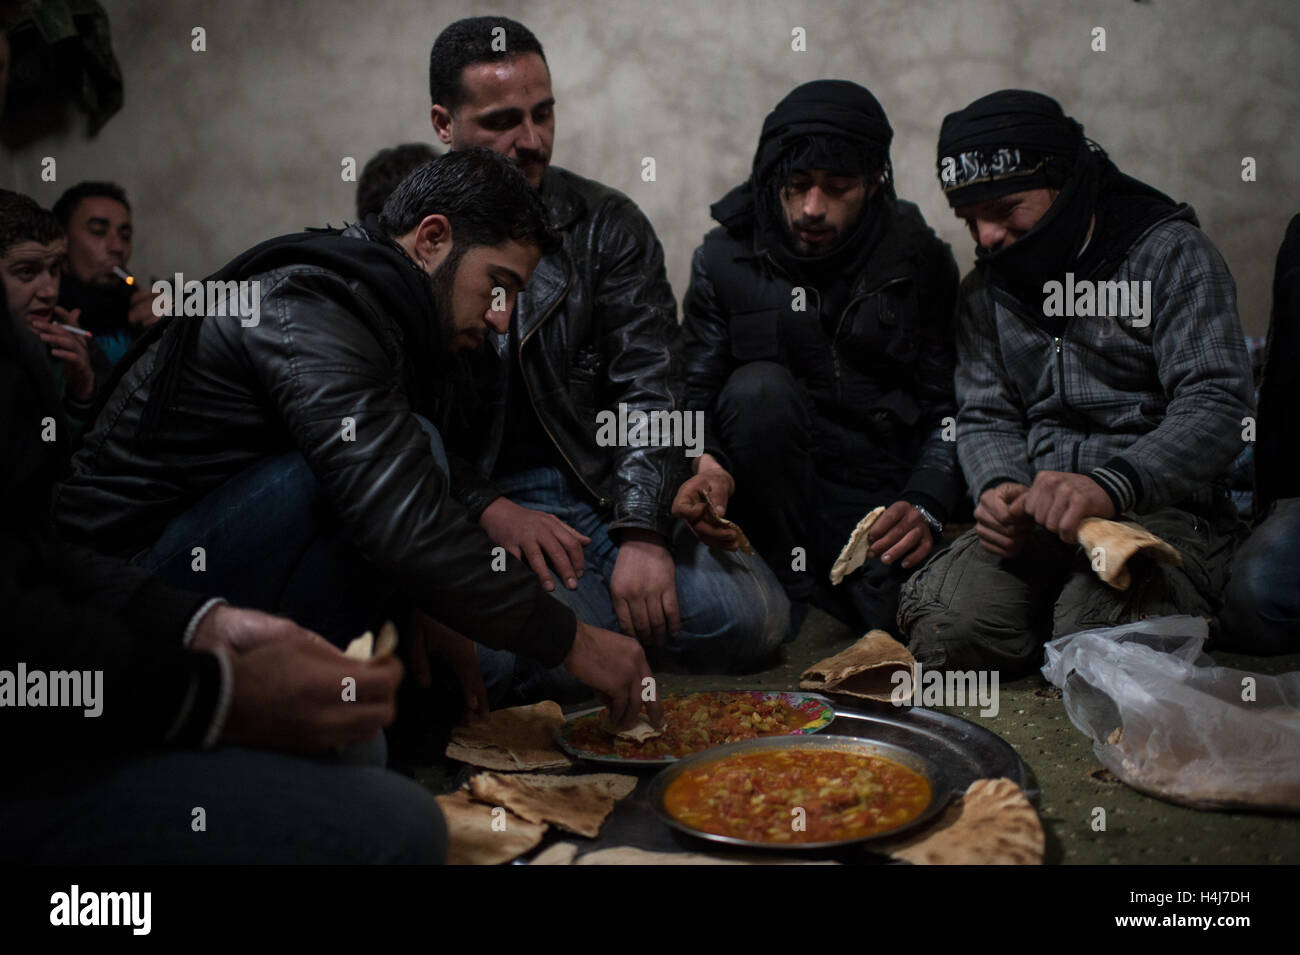 Lunch at the katiba -  11/02/2013  -  Syria / Aleppo / Al-Bab  -  Fighters of the  Abo Baker brigade ( Free Syrian Army) share a lunch during fightings against syrian governmental troops defending the Kwiriss military airport, in Al-Bab near Aleppo.   -  Edouard Elias / le Pictorium Stock Photo